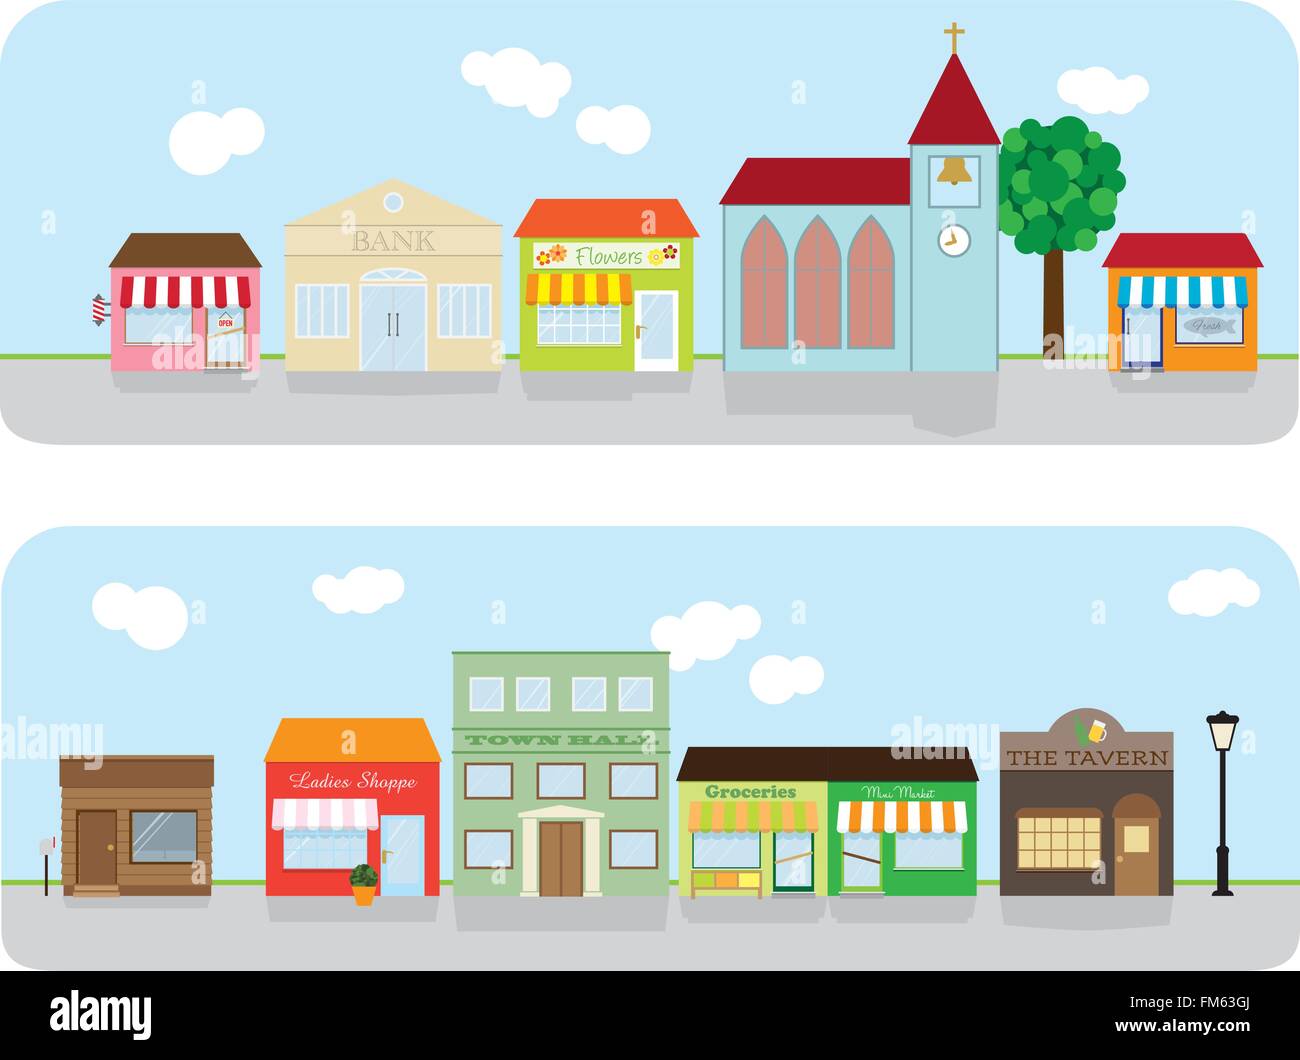 Small town main street with shops, church, bar and public buildings. Stock Vector